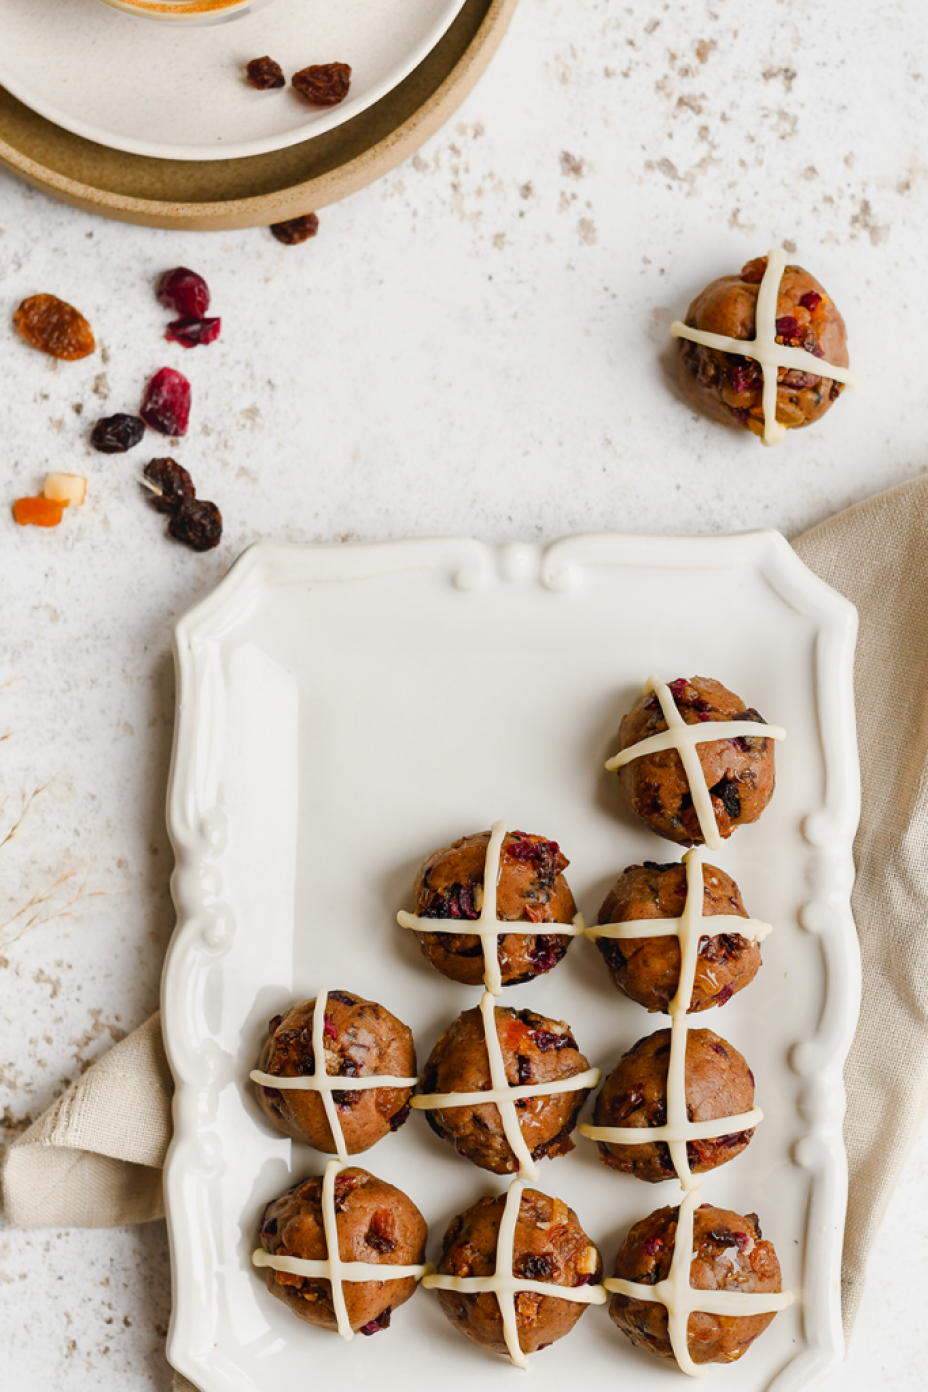 Hot cross buns sweets. A fun, playful and delicious no bake cookie dough treat for Easter